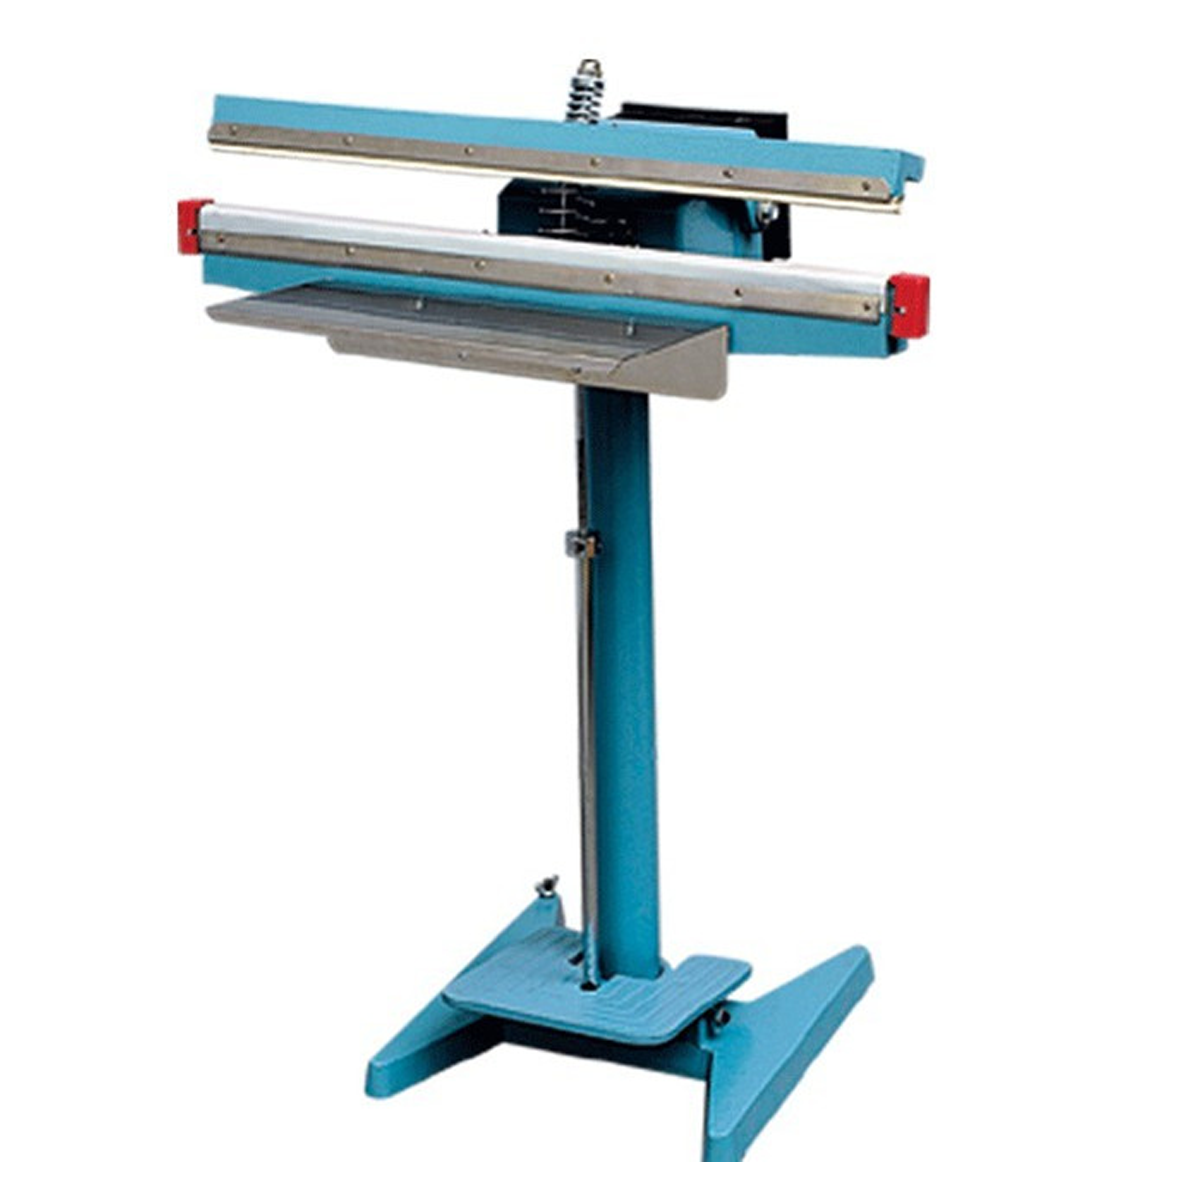 Heat Sealing Machine Foot Operated sealing for PP, PE,  Bags (80 Cms)